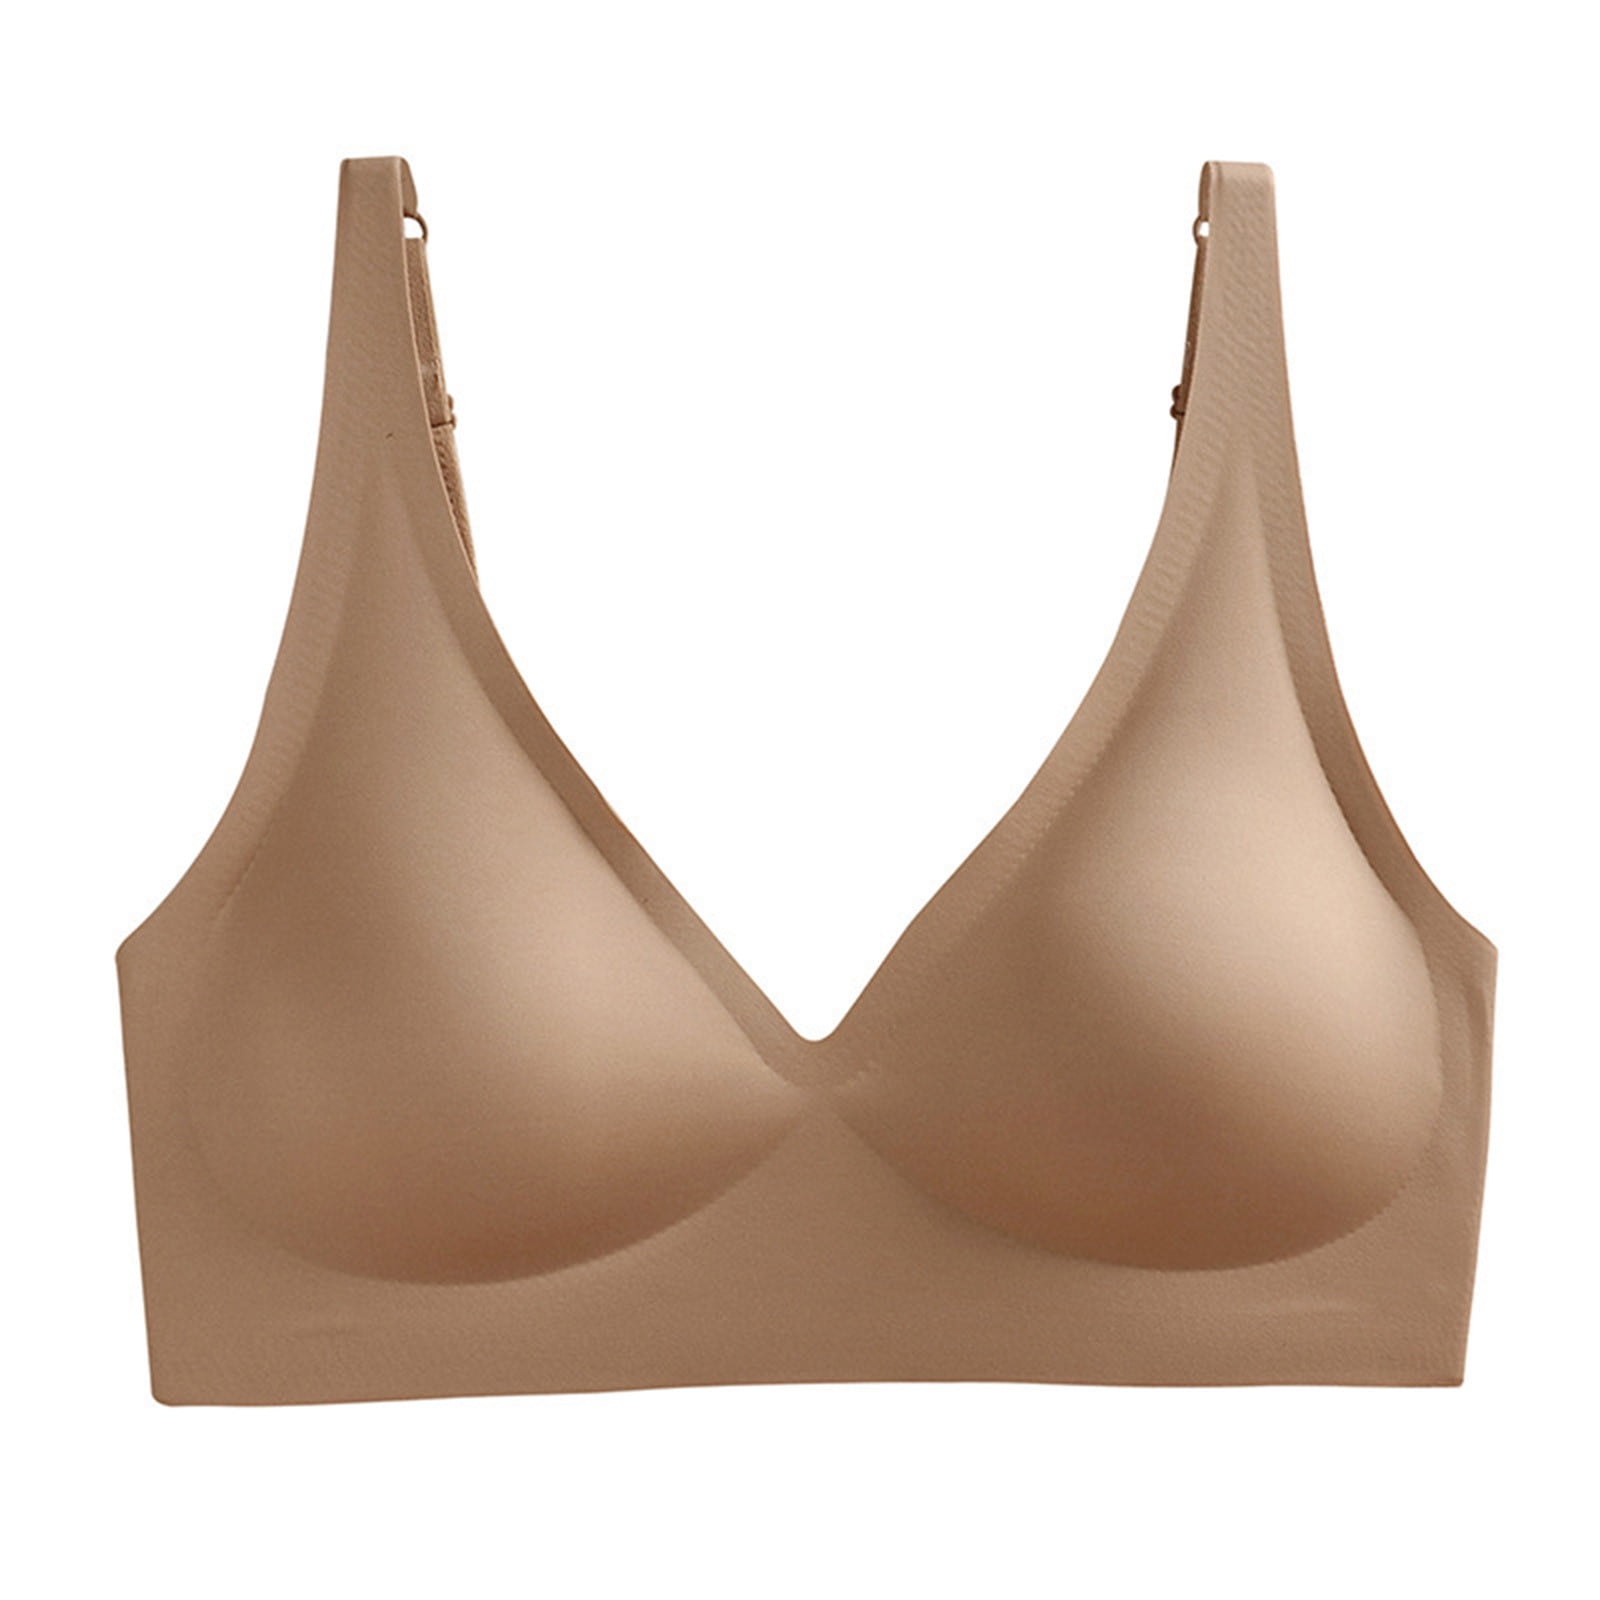 Bras For Women,Lace Minimizer Bras For Women Full Coverage Unlined  Underwire Minimizing Plunge Bra(M,Brown) 